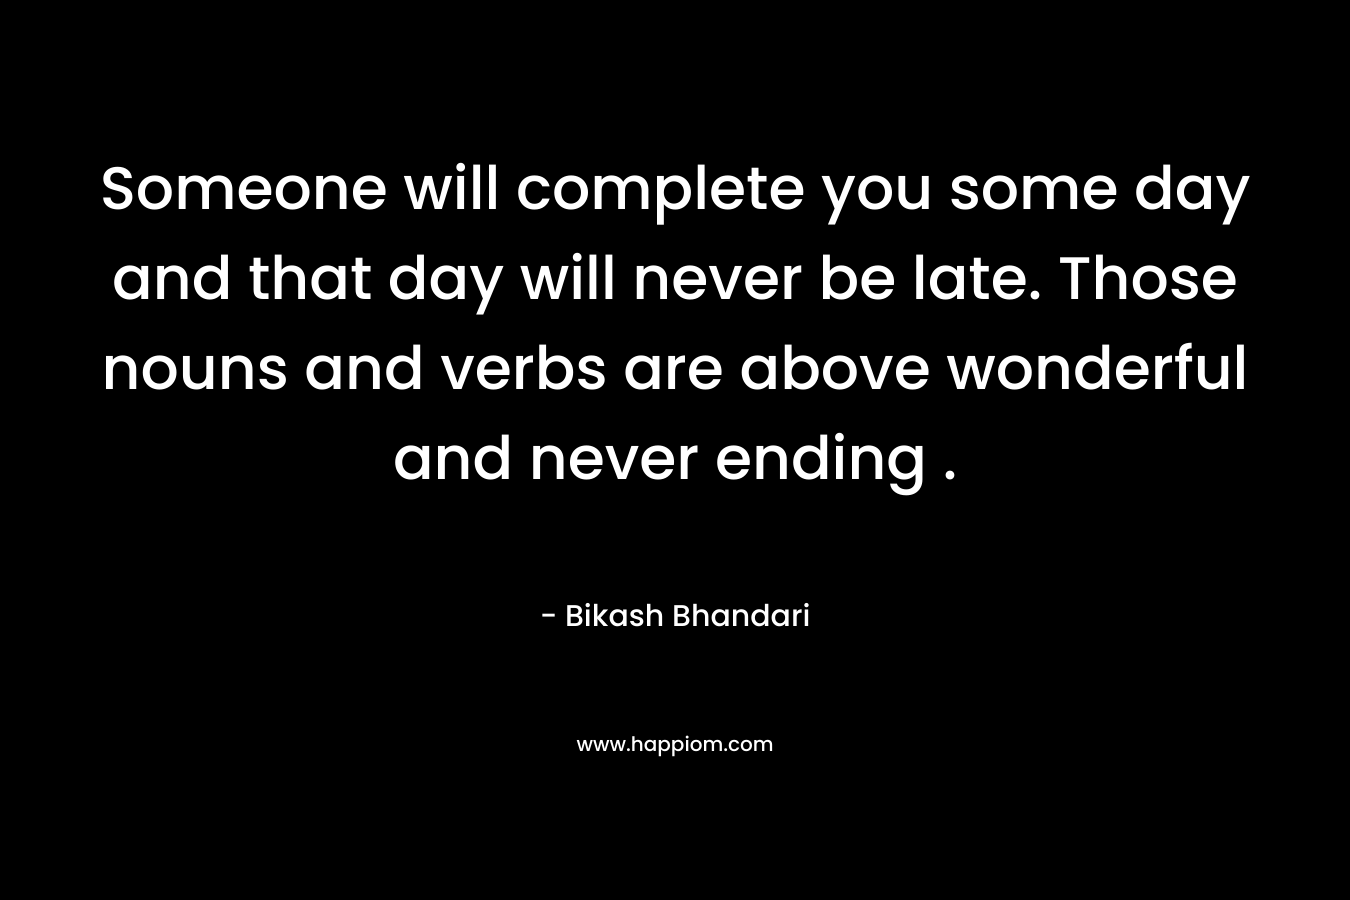 Someone will complete you some day and that day will never be late. Those nouns and verbs are above wonderful and never ending . – Bikash Bhandari